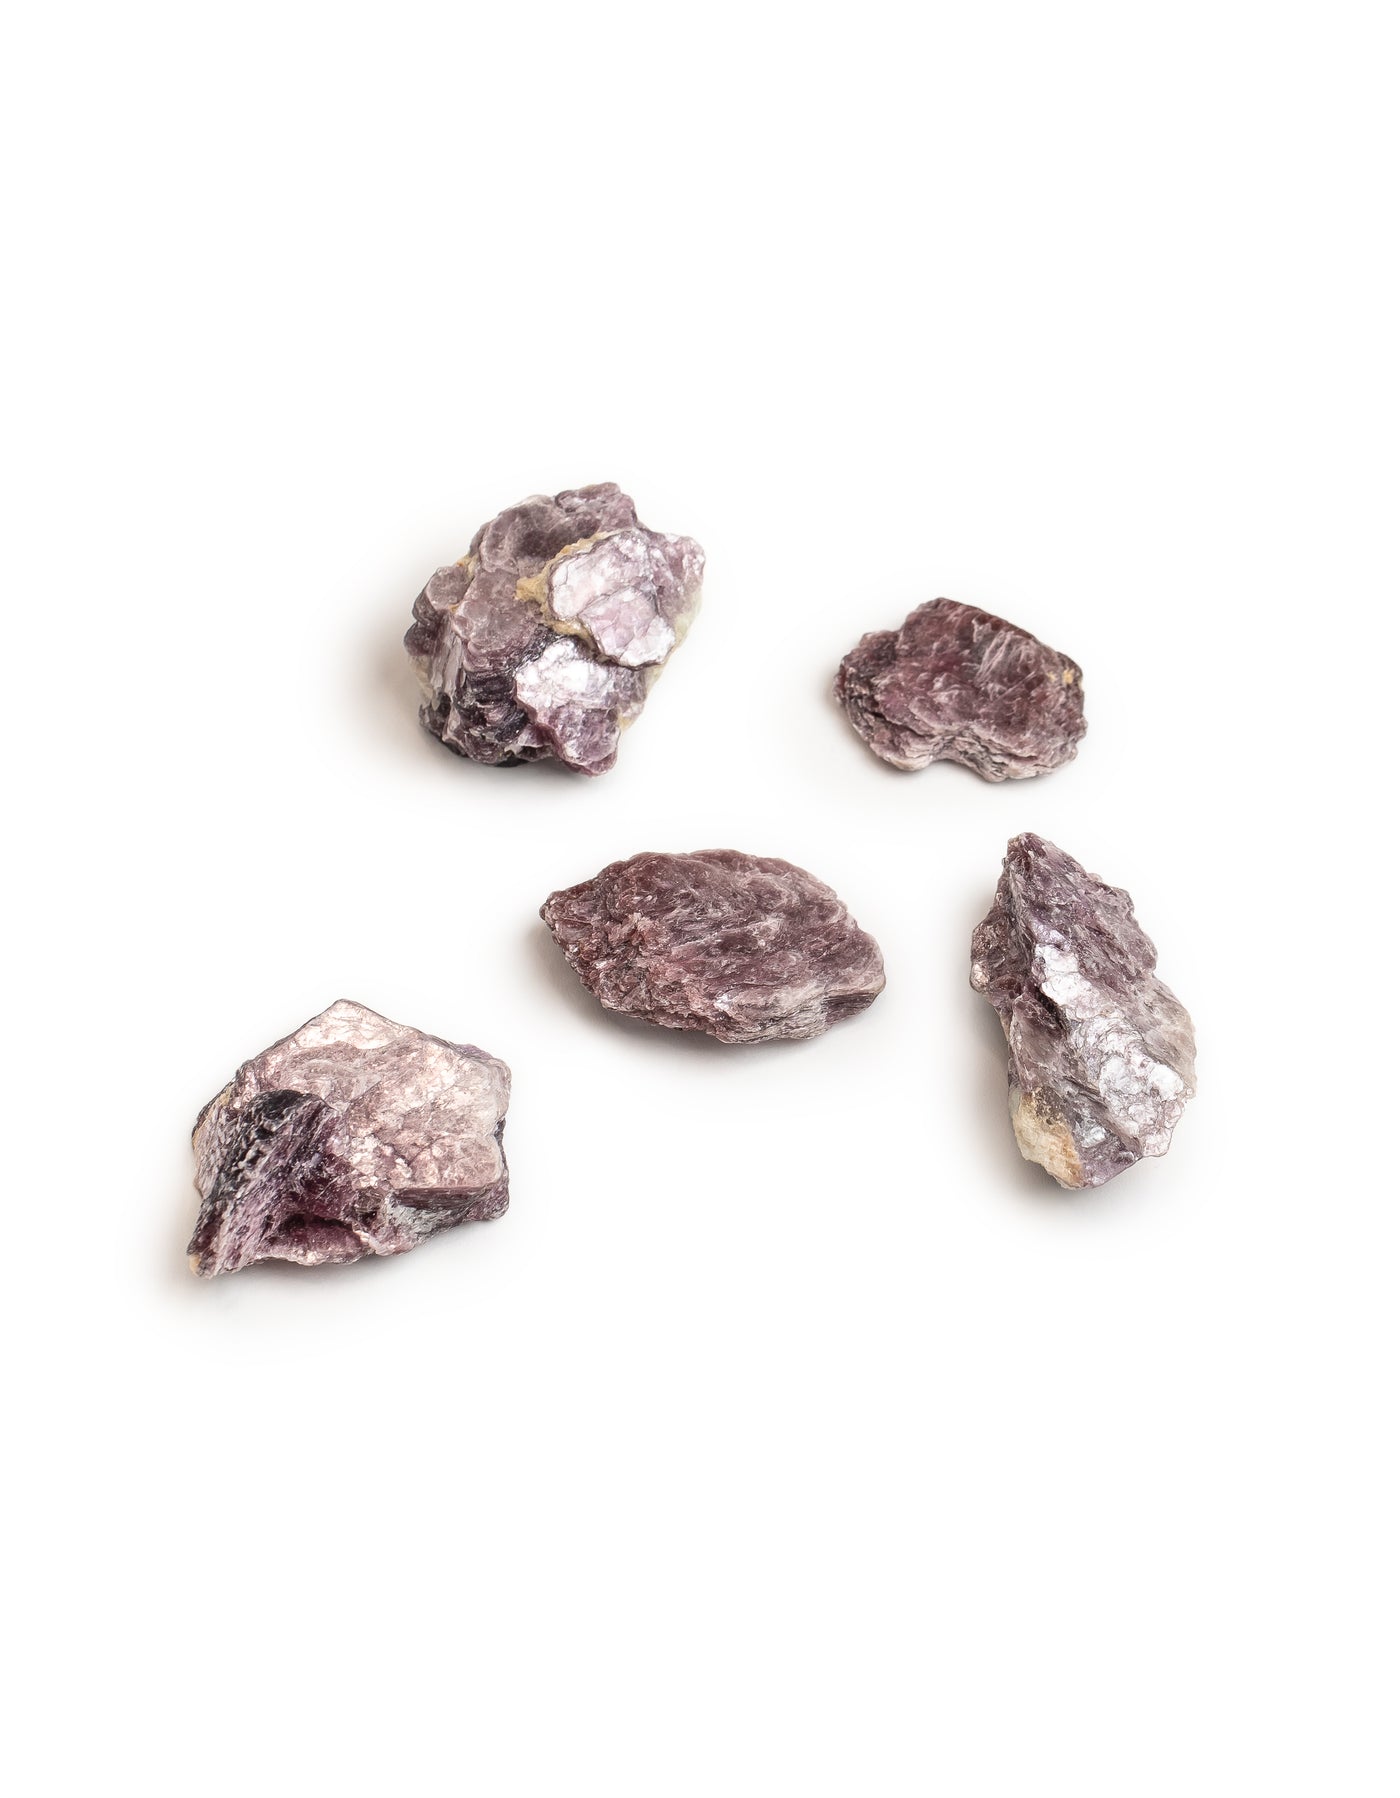 5 different pieces of genuine Lepidolite crystal showing the difference in size, shape and patterns by Energy Muse